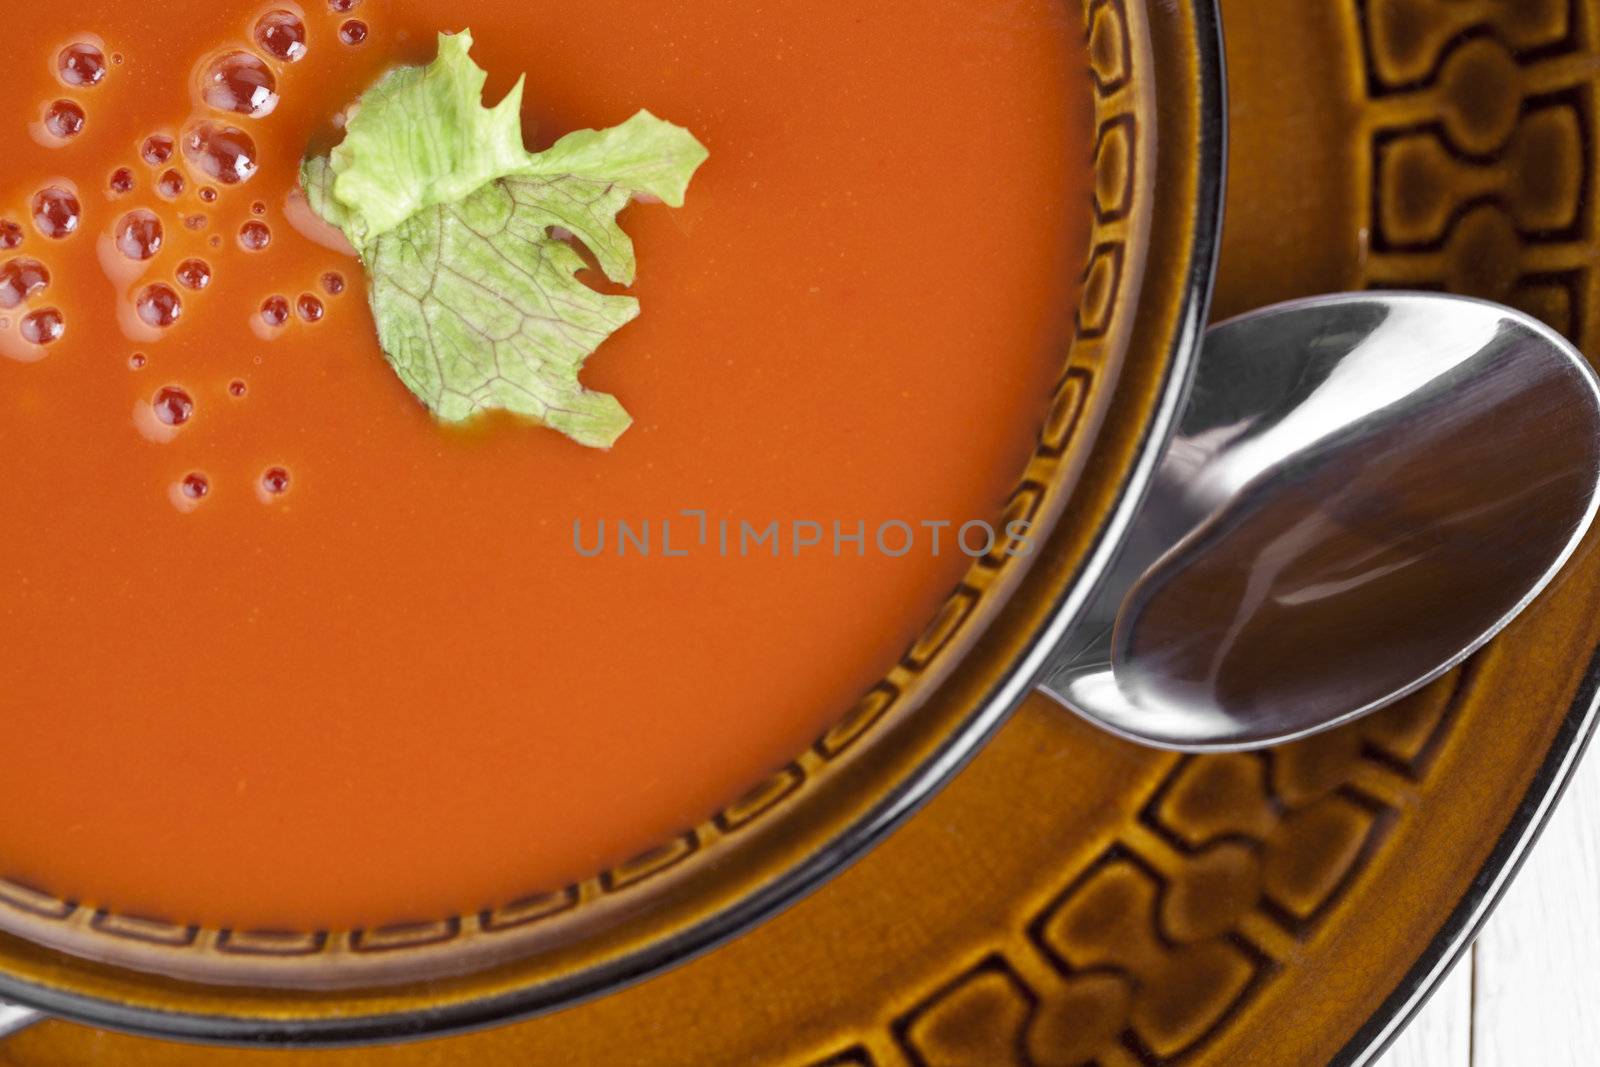 Tomato soup with green leaf garnish on a ceramic bowl